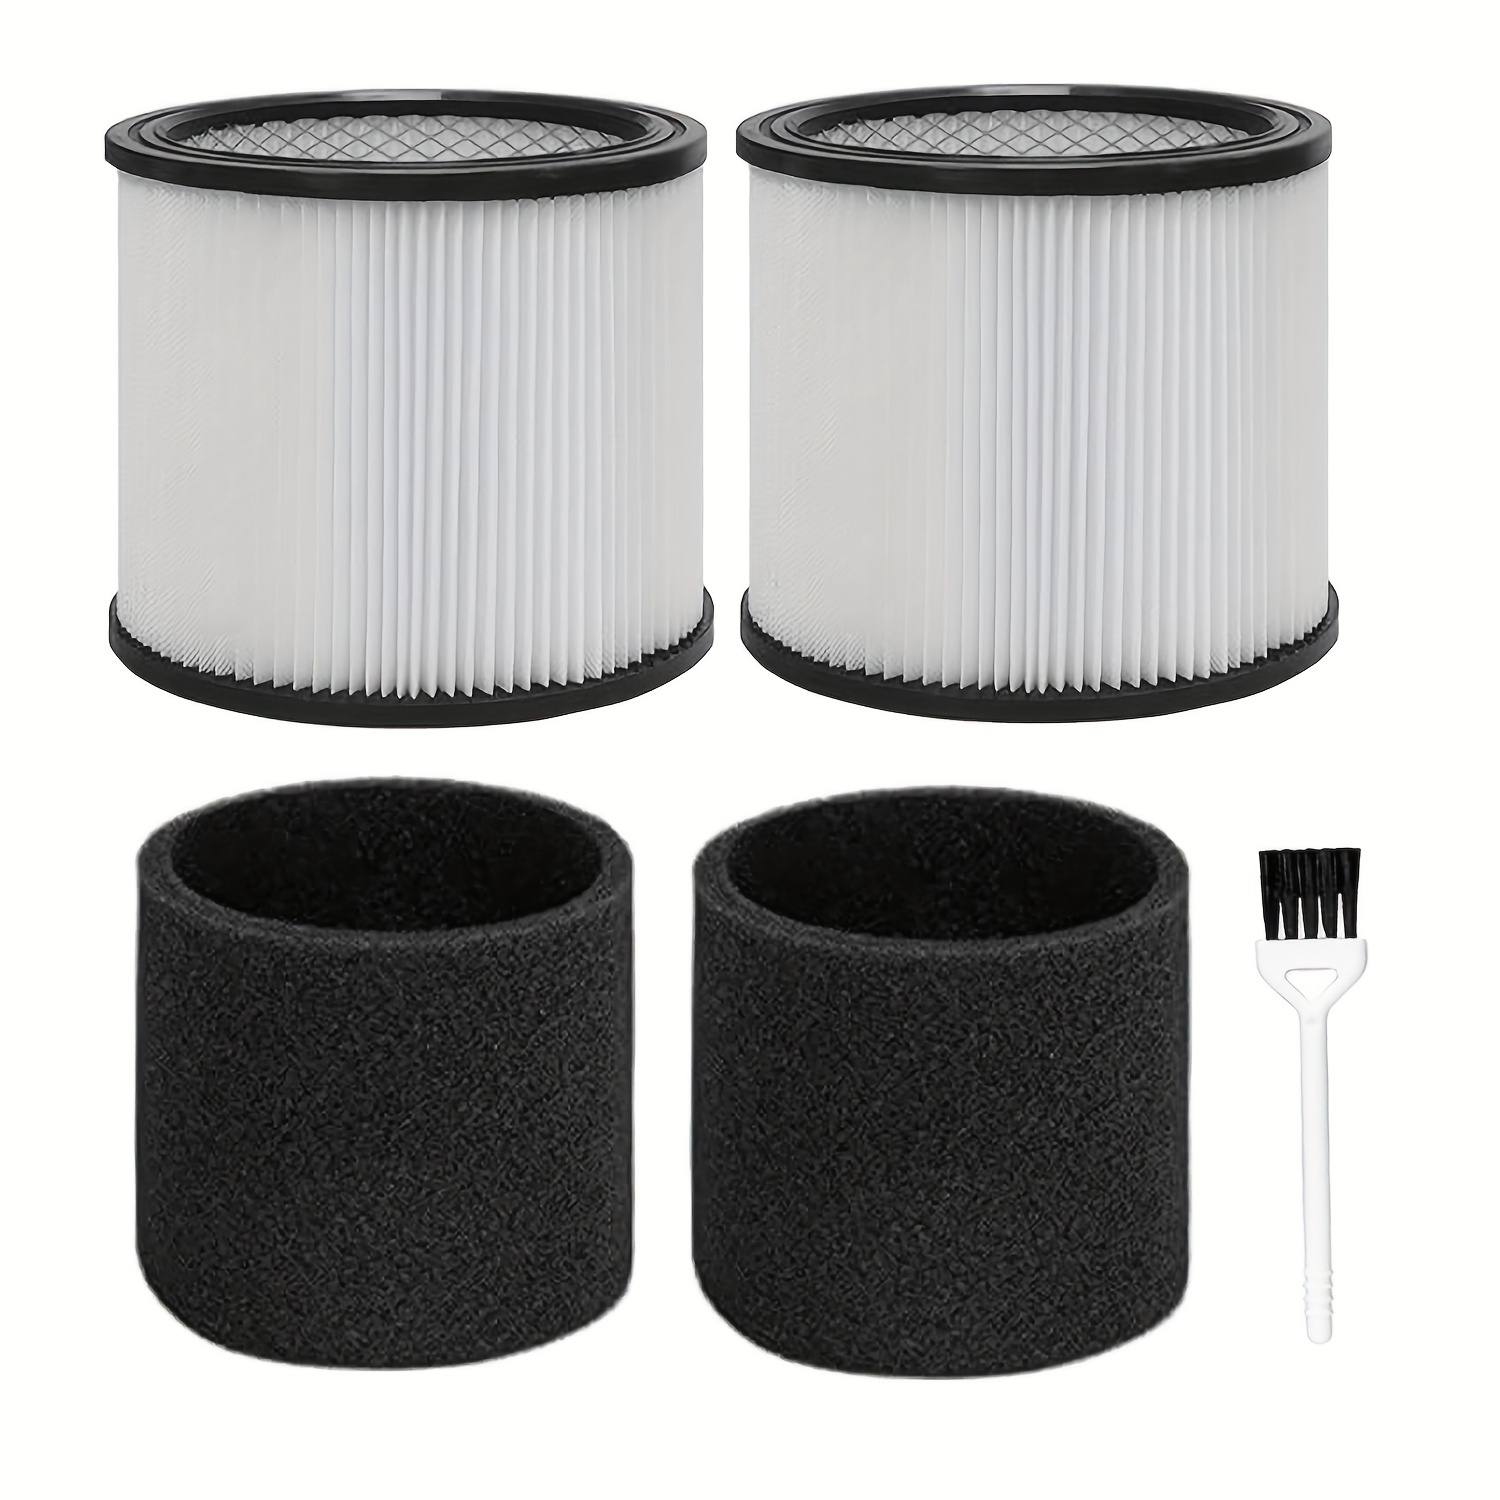 Hhvkf10 Filter Replacement Compatible With Black And Decker - Temu